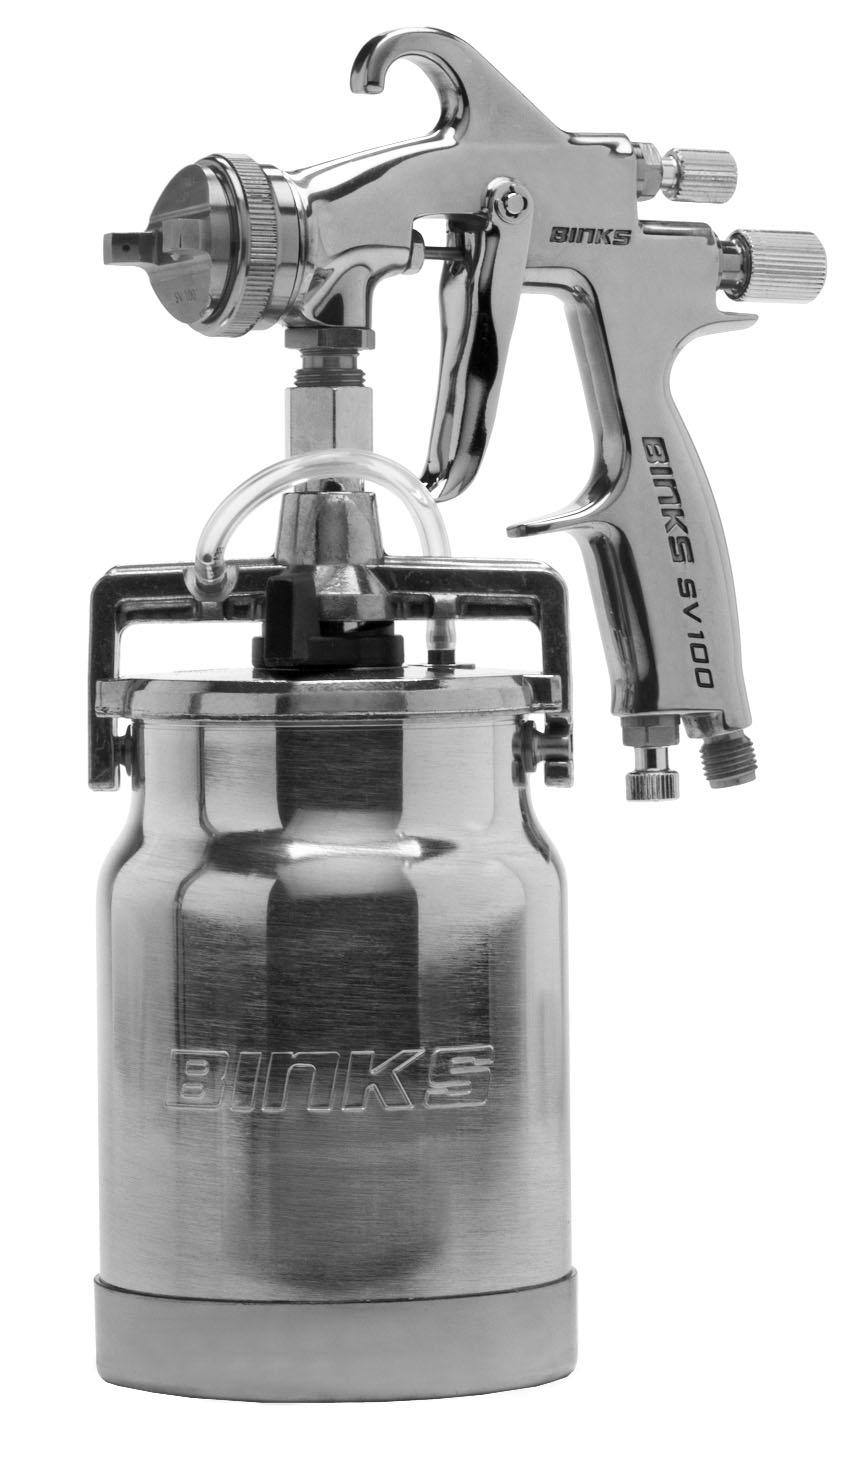 Binks SV100 Conventional Suction Feed Spray Gun The following instructions provide the necessary information for the proper maintenance of the Binks SV100 suction feed spray gun.